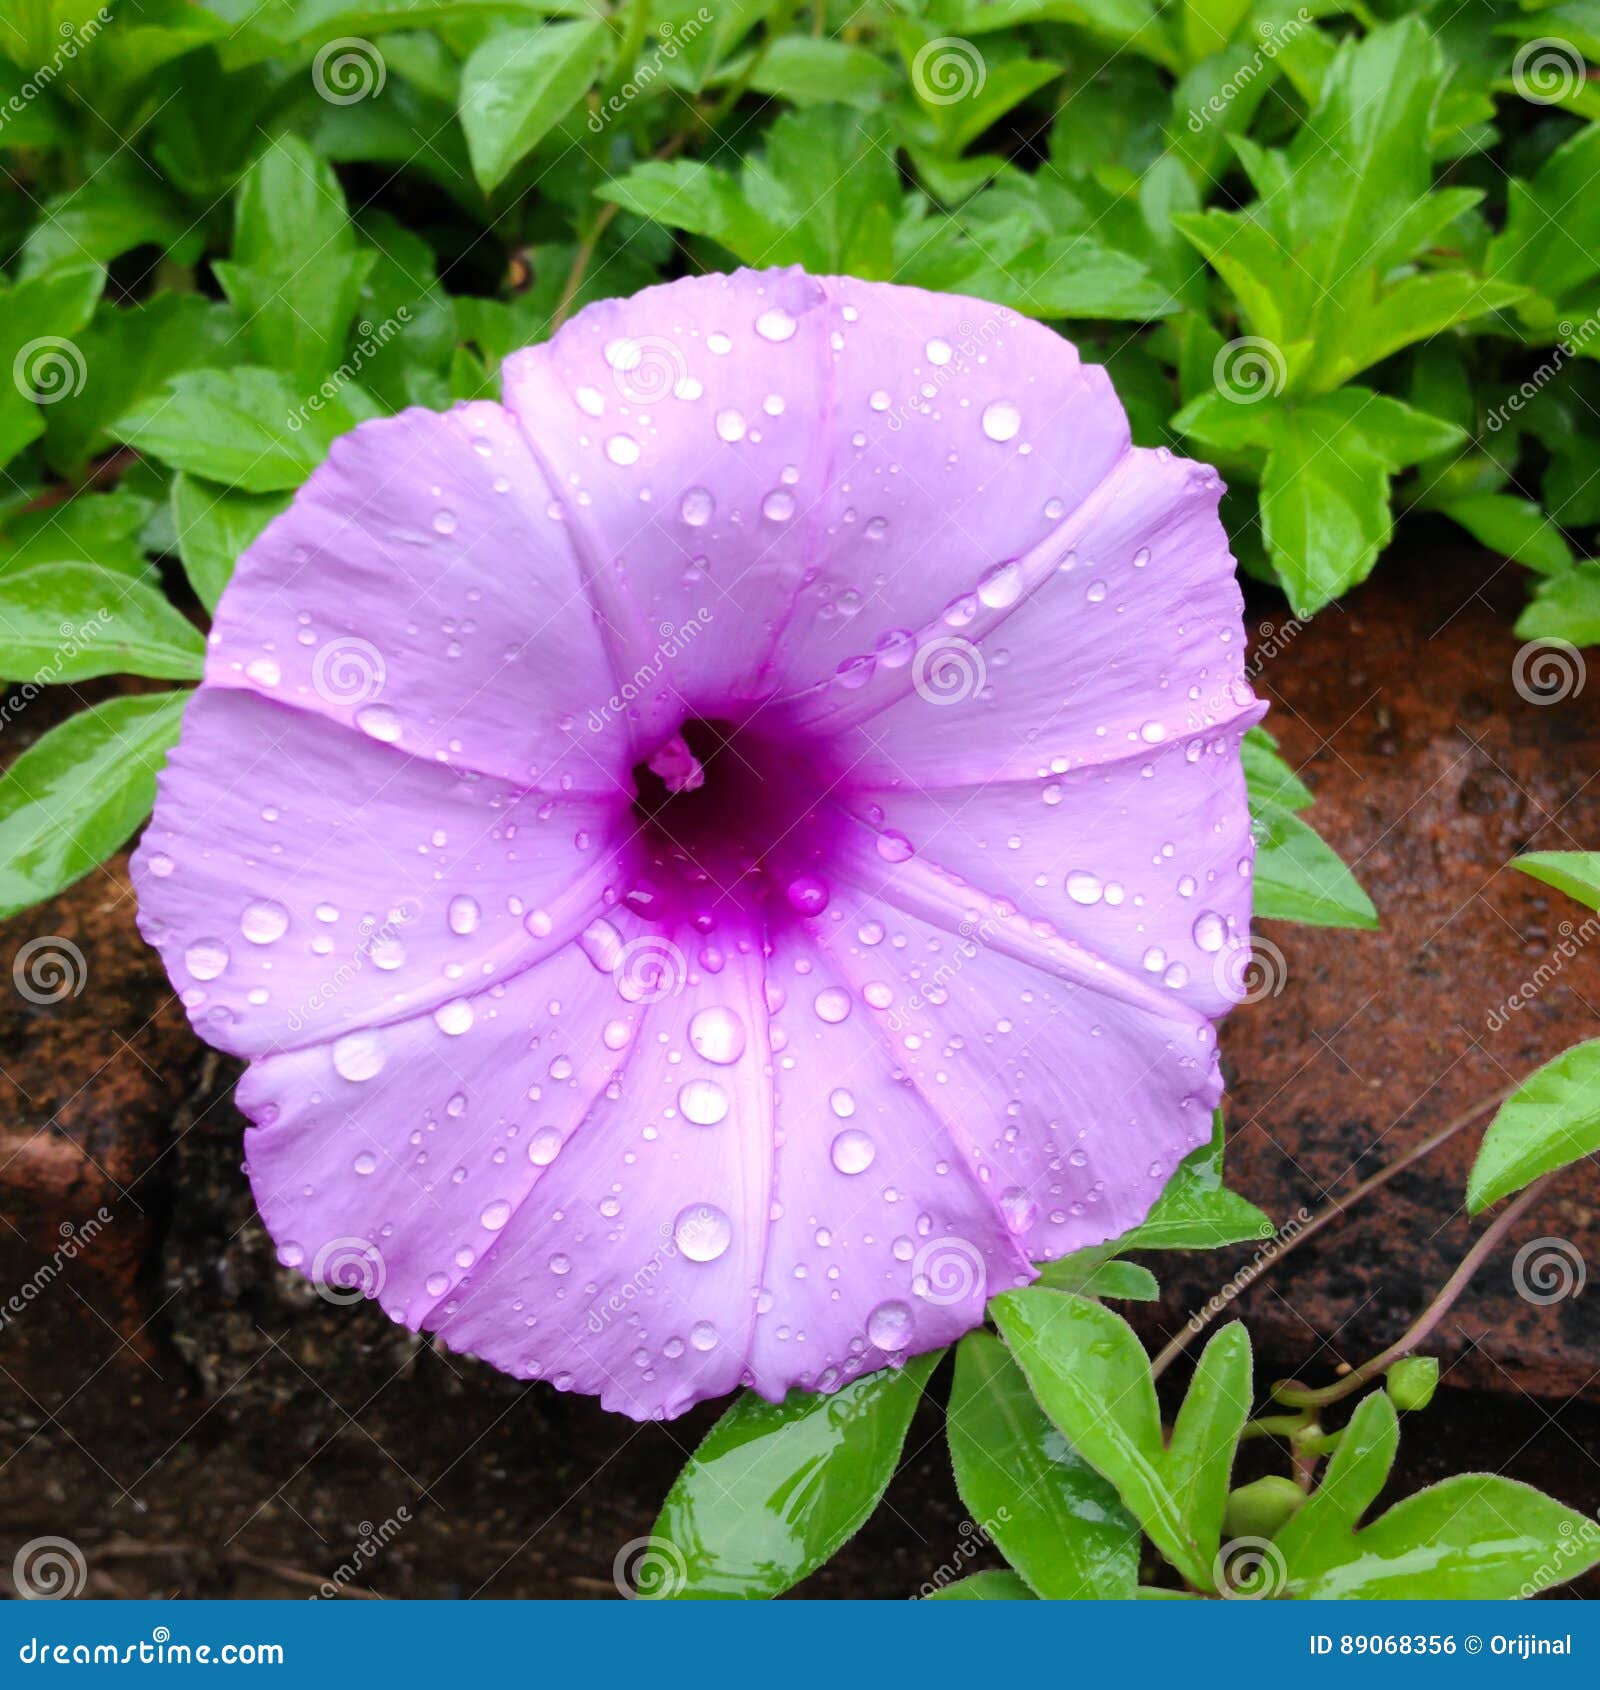 Ipomoea Aquatica, Water Spinach, River Spinach Flower Stock Photo ...